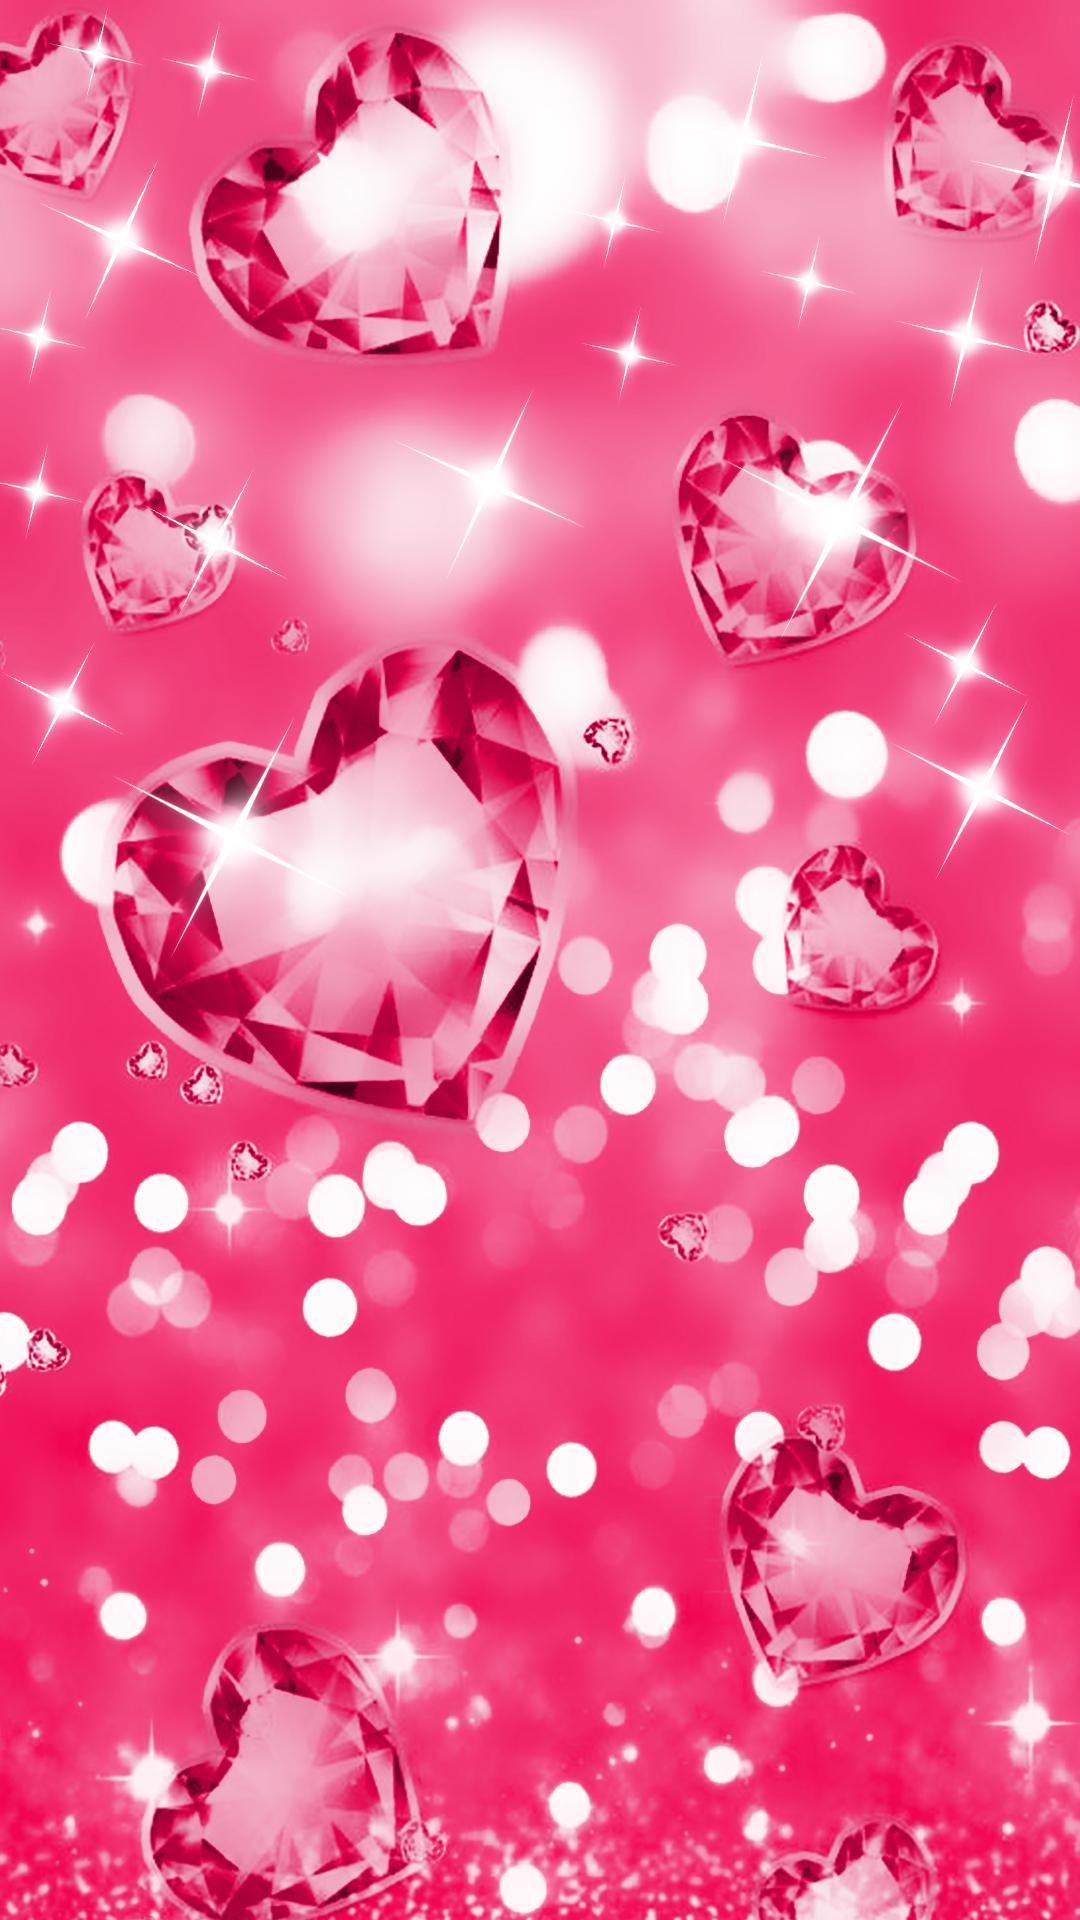 Bling Diamond Apus Live Wallpaper For Android Apk